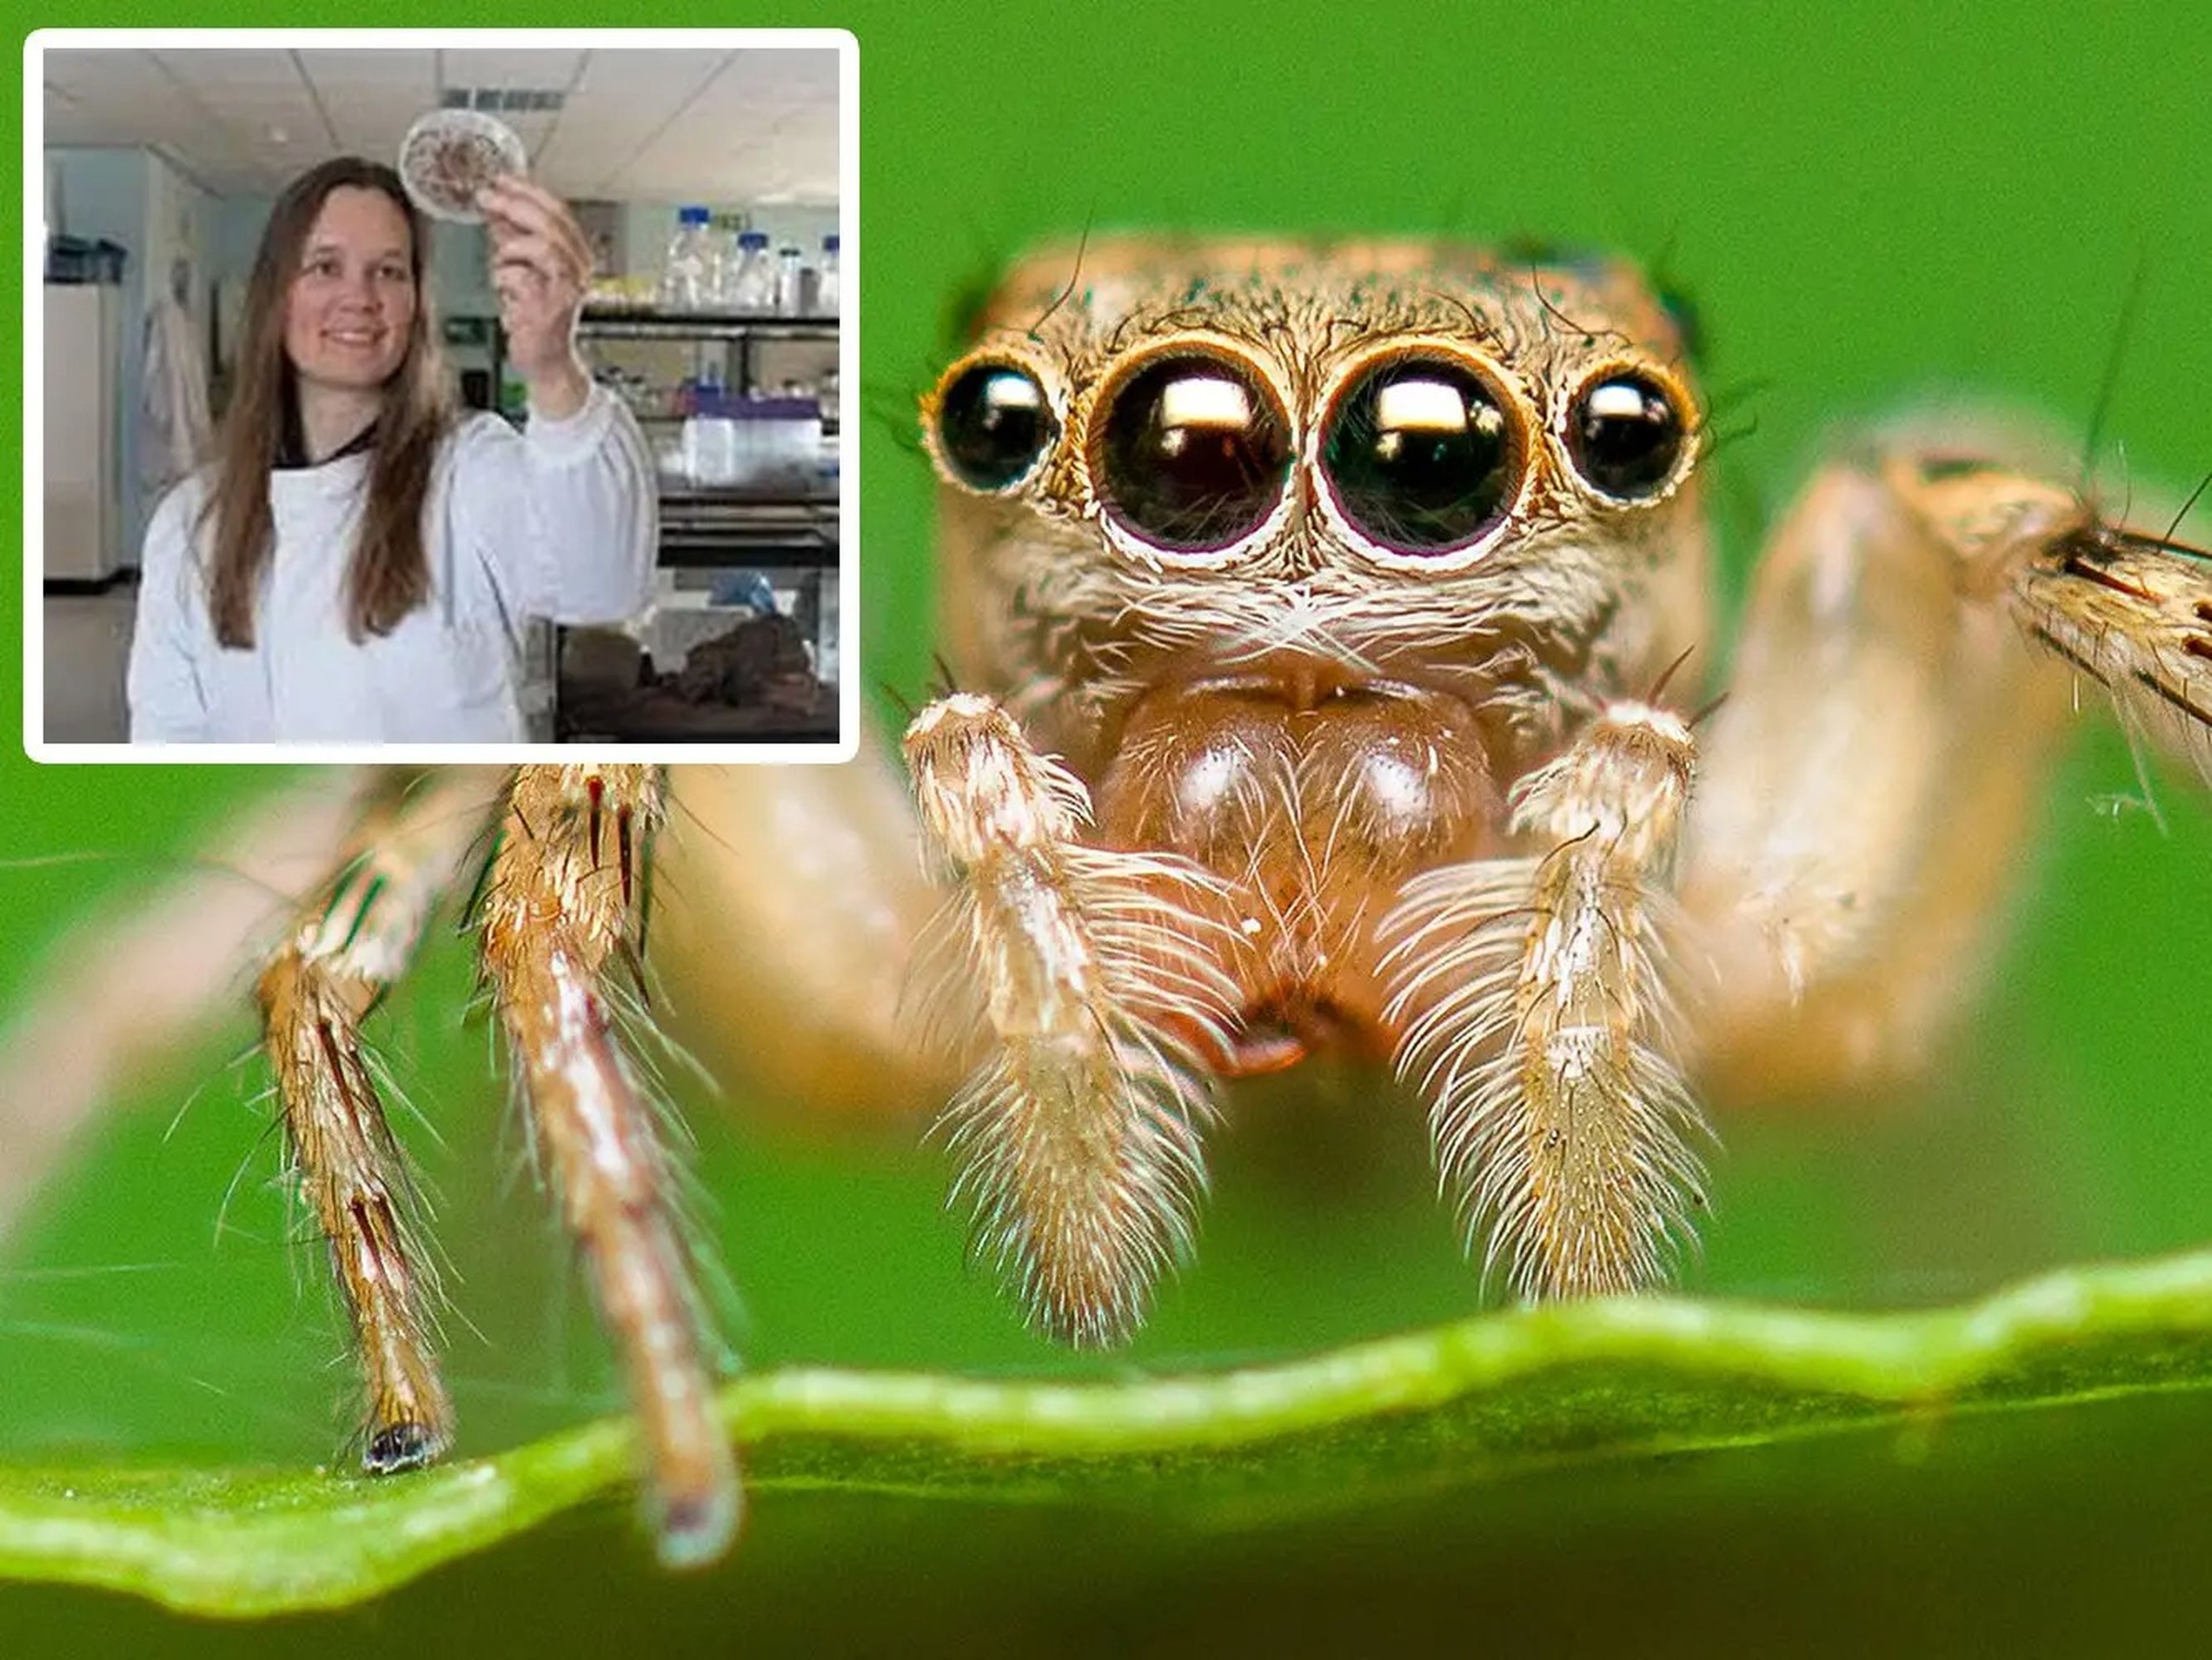 A photo montage shows a close up of a spider next to a picture of biologist Sara Goodacre. Goodacre is shown wearing white protective gear in a laboratory, looking up at scientific equipment.